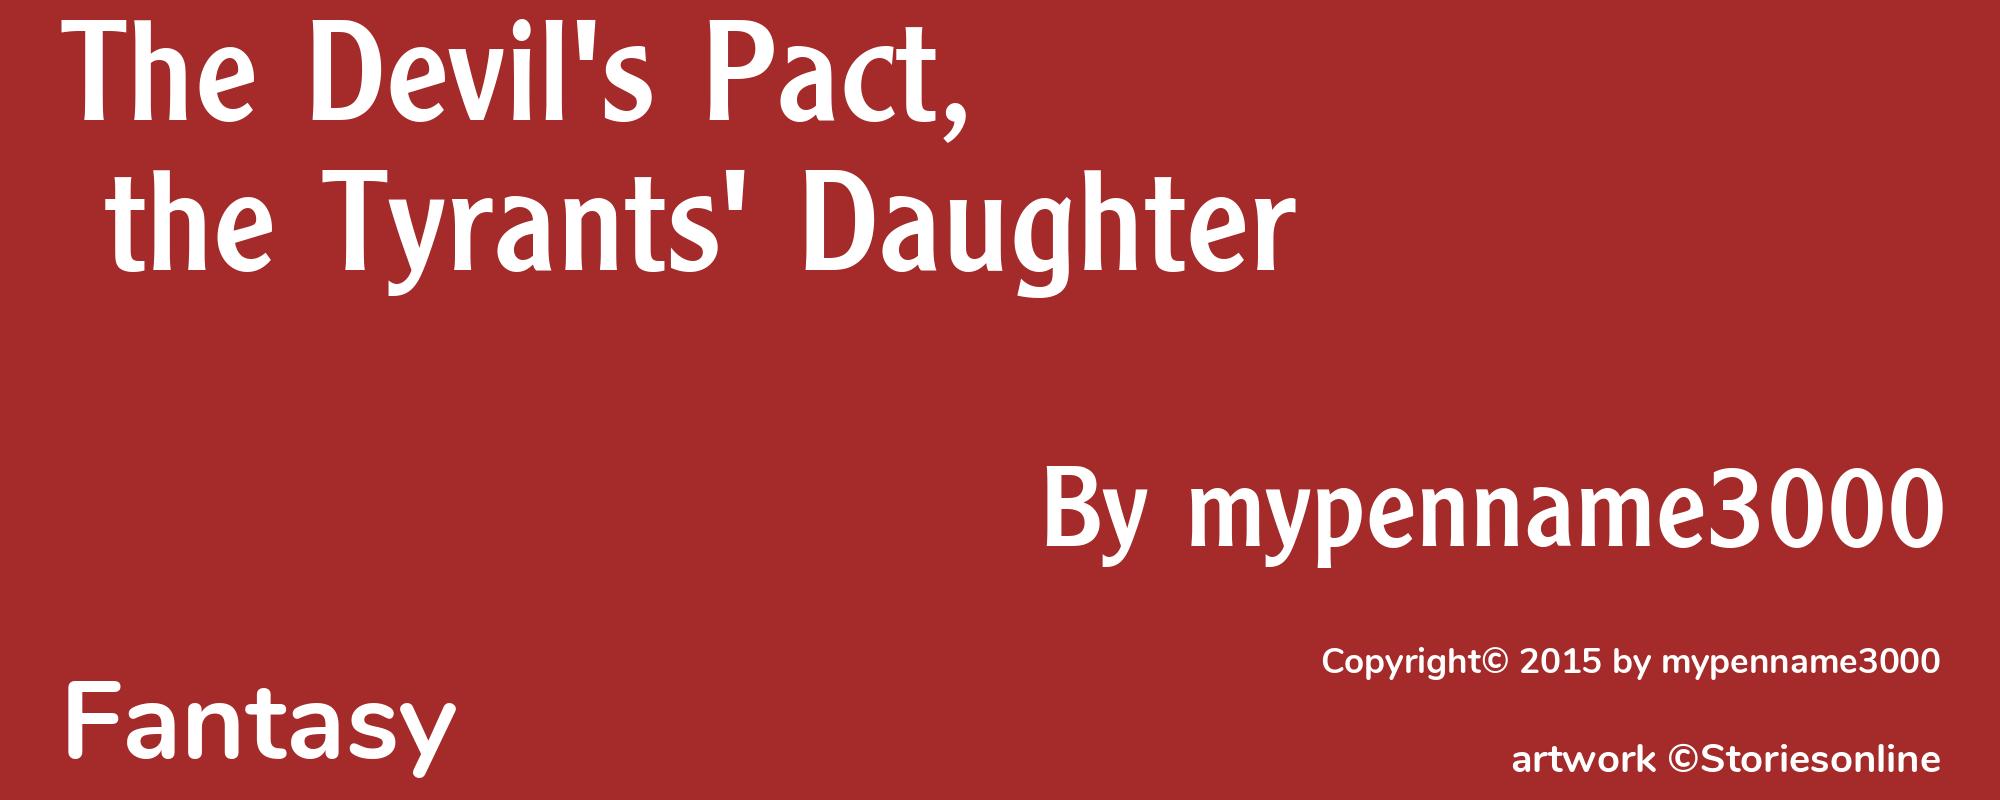 The Devil's Pact, the Tyrants' Daughter - Cover